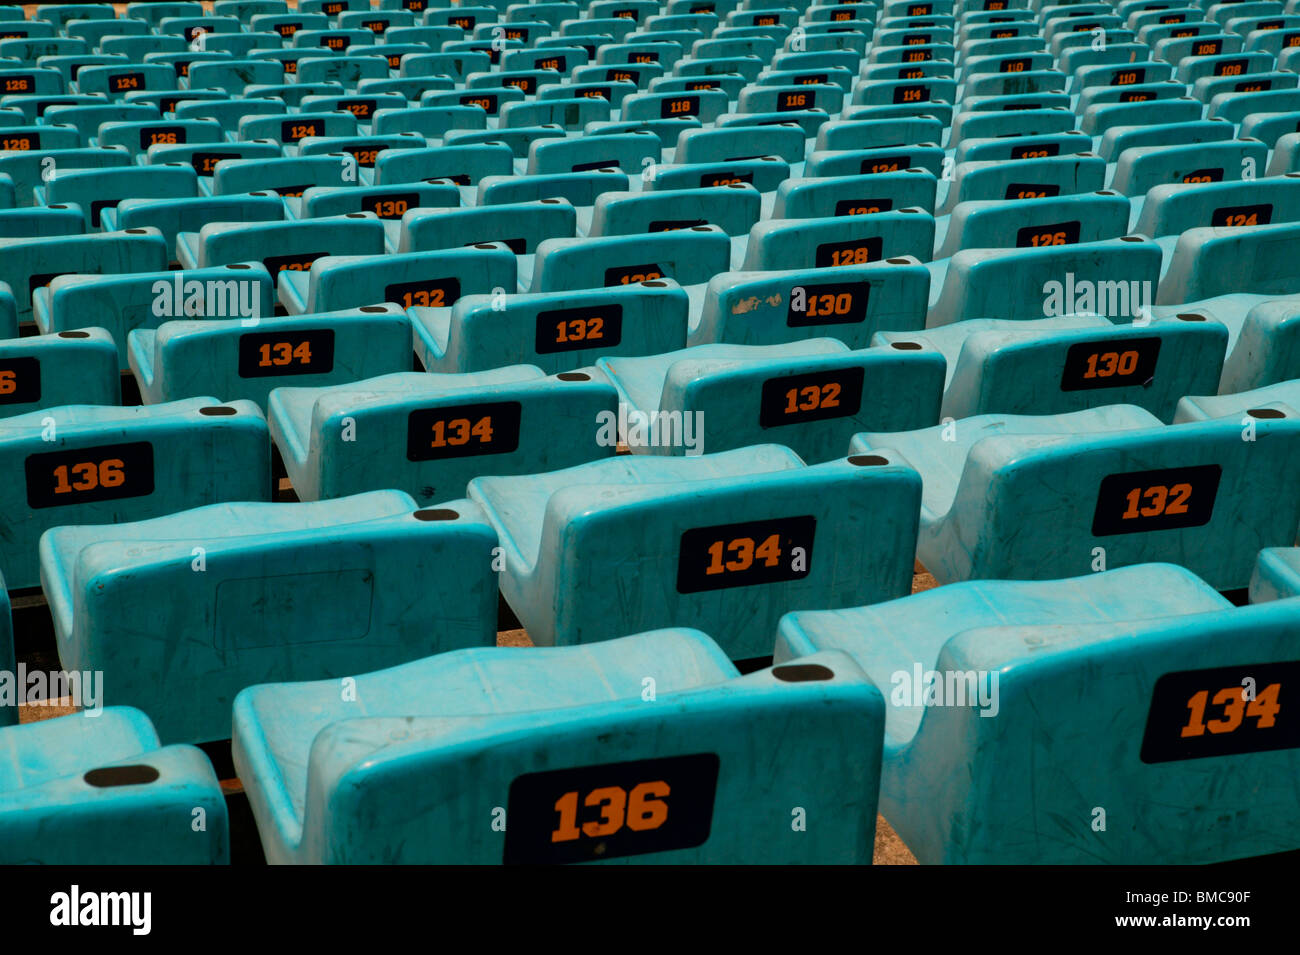 Stadium seats in a sports view showing seat number Stock Photo - Alamy